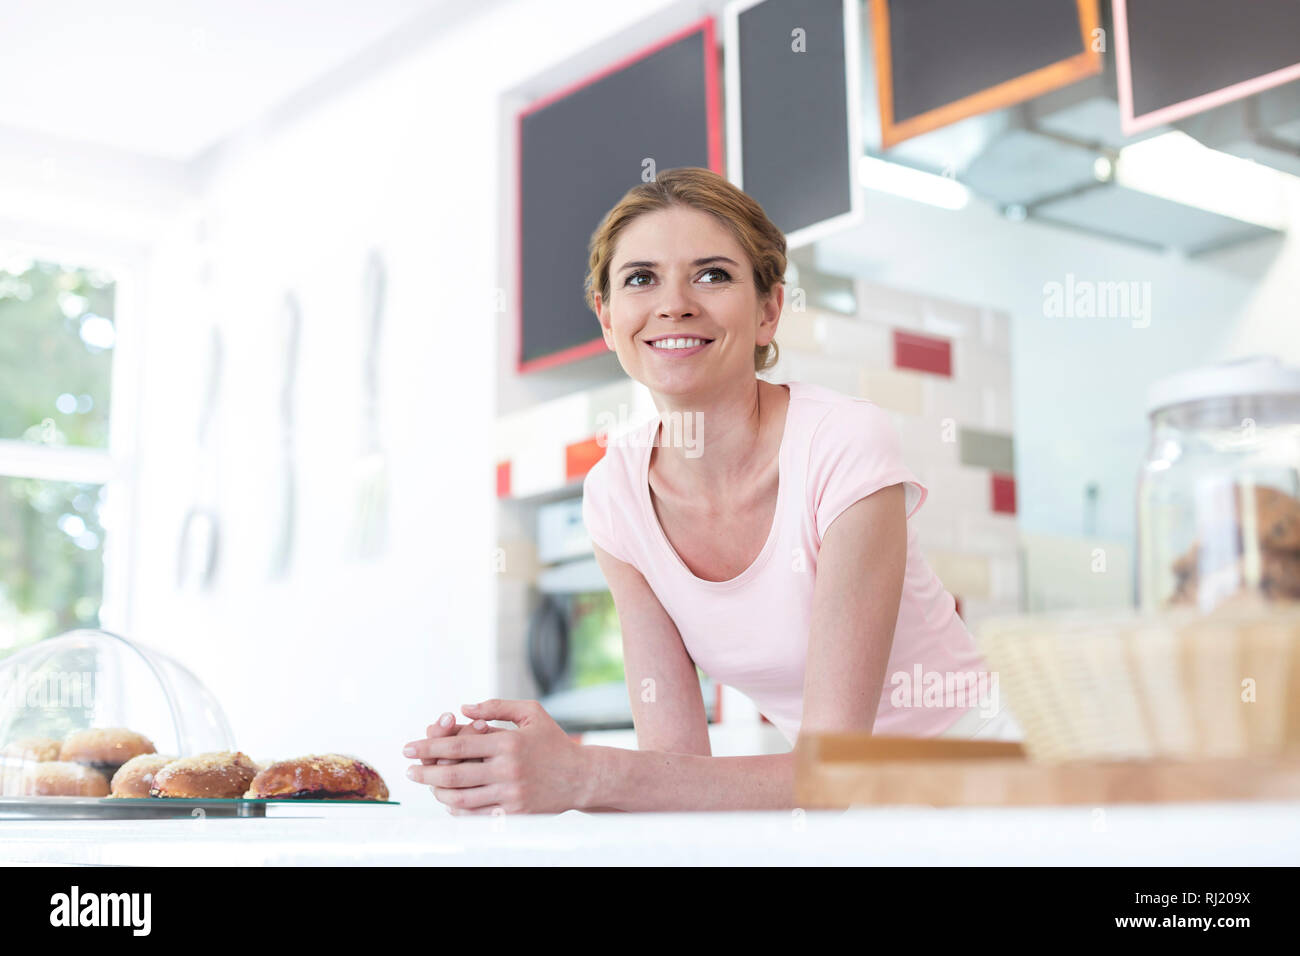 Smiling young waitress leaning on counter at restaurant Stock Photo